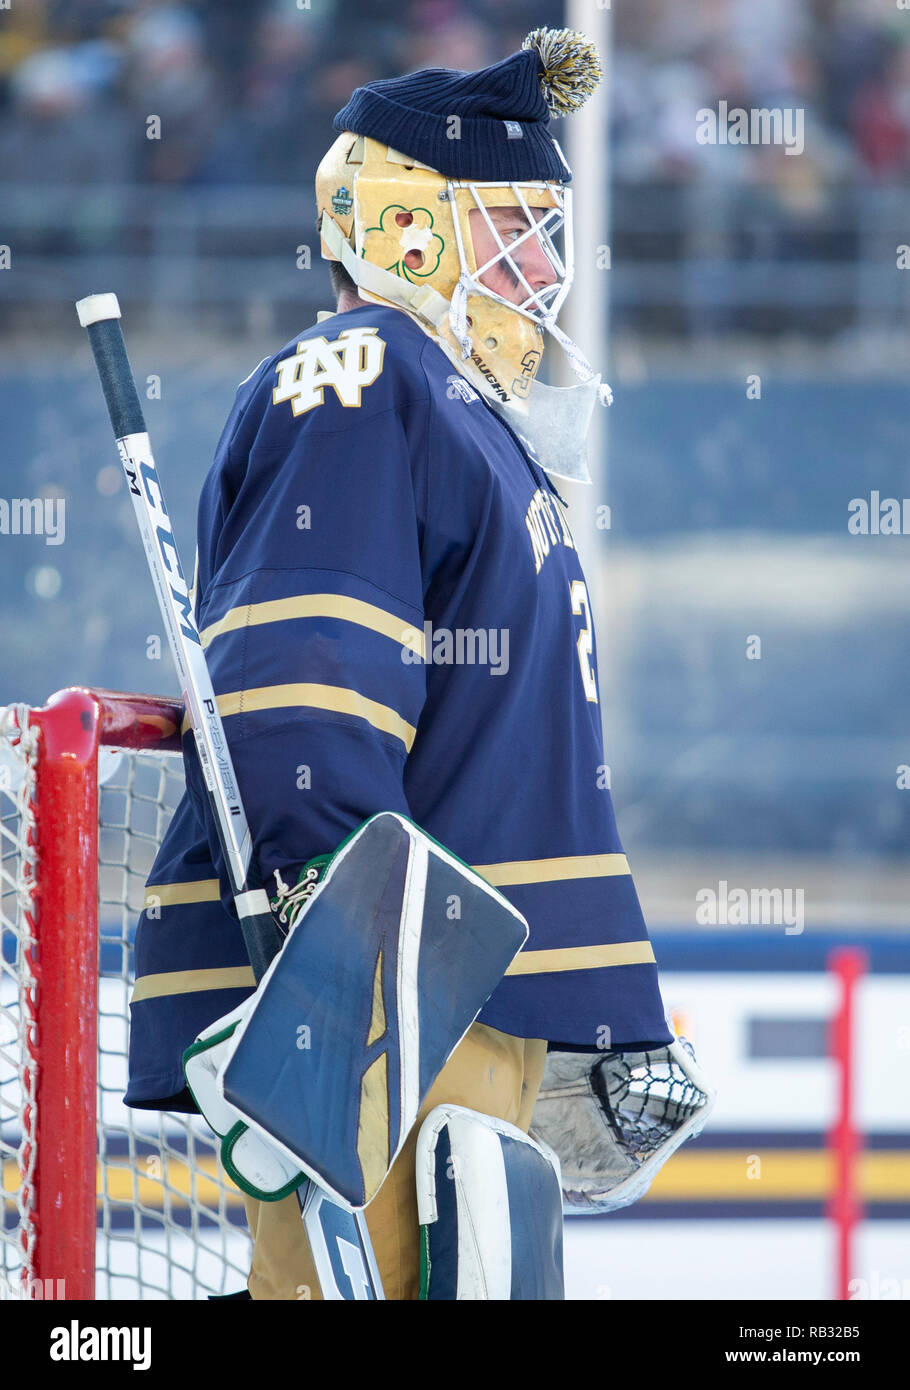 Indiana, USA. 05th Jan, 2019. Notre Dame goaltender Cale Morris (32) during  NCAA Hockey game action between the Michigan Wolverines and the Notre Dame  Fighting Irish at Notre Dame Stadium in Indiana.